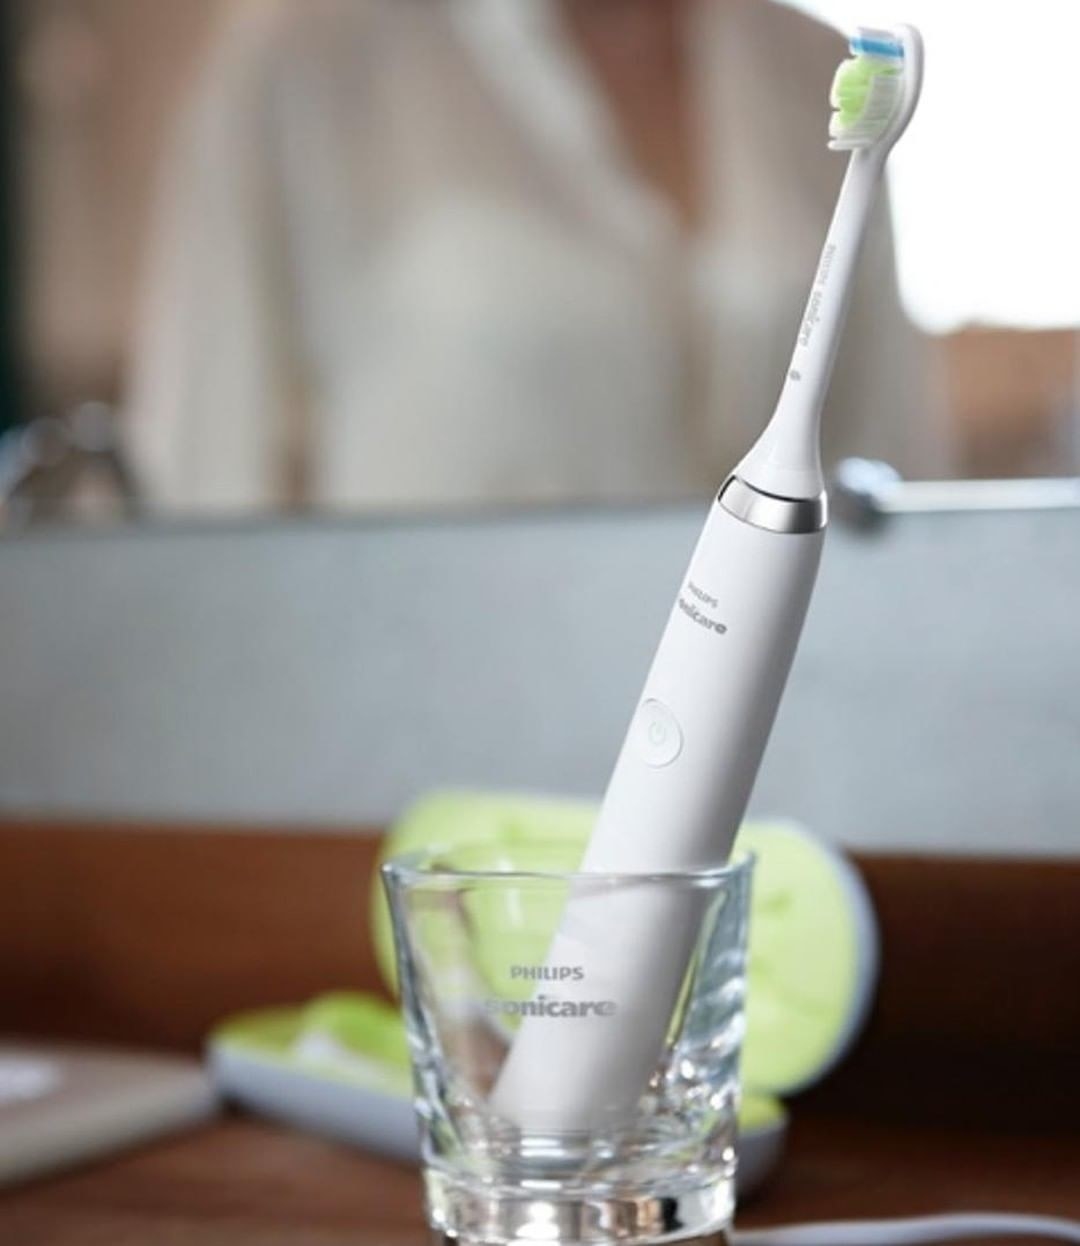 The toothbrush in its charging glass